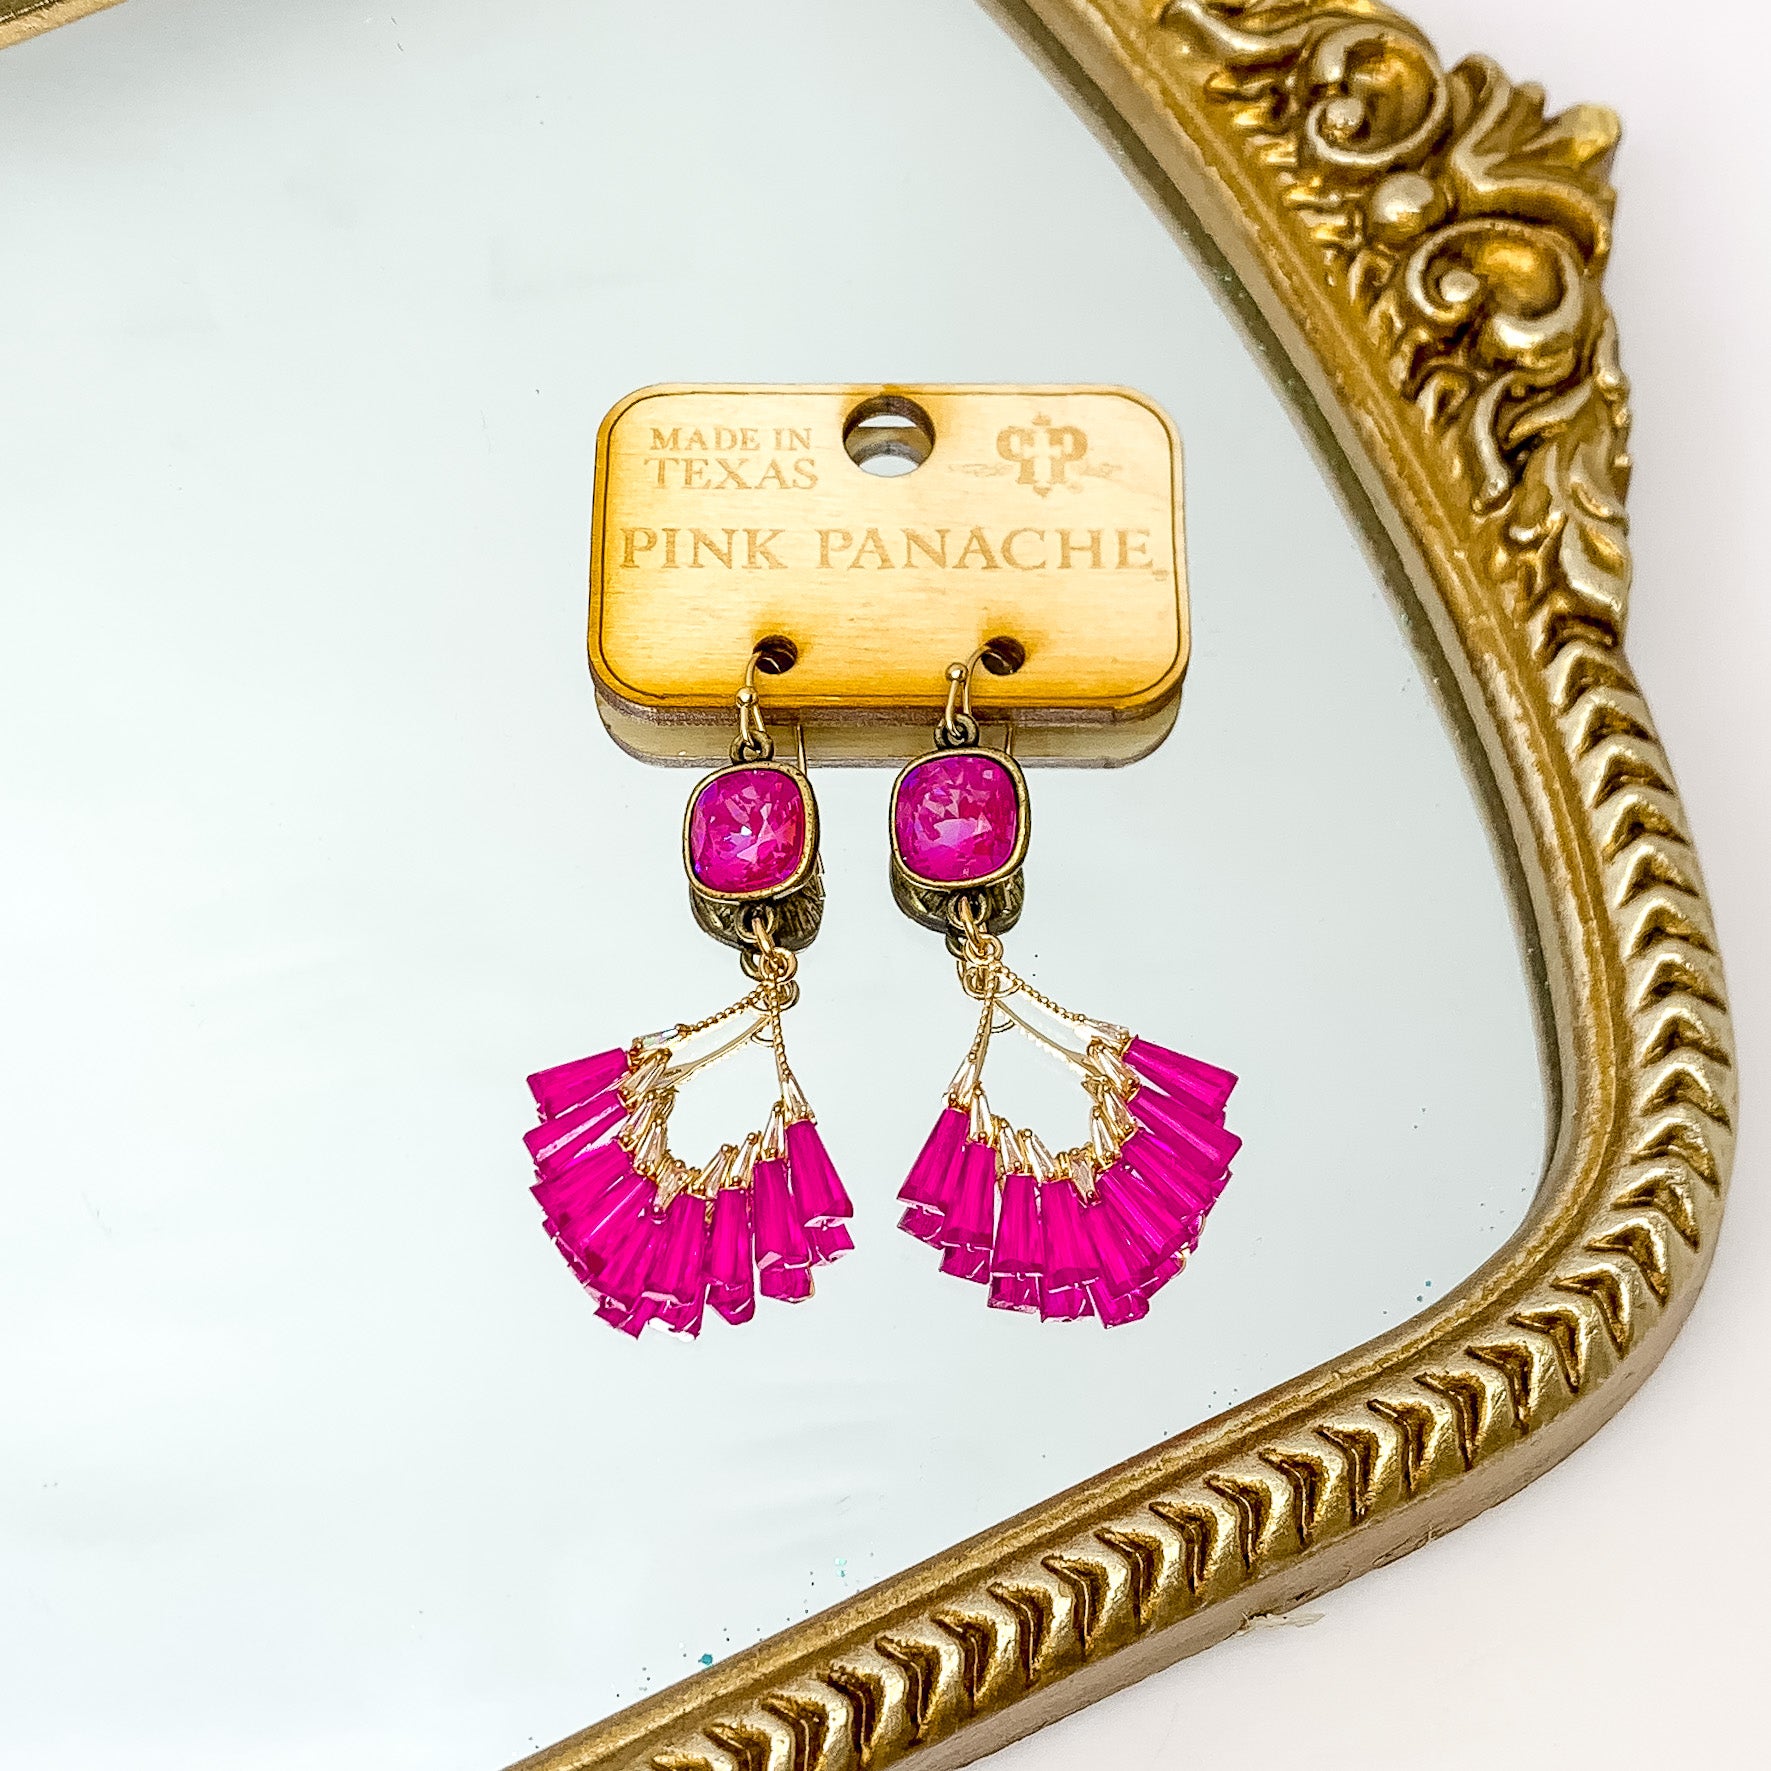 Pink Panache | Royal Red Delight Cushion Cut Drop Earrings with Gold Tone Diamond Pendant and Fuchsia Pink Beads - Giddy Up Glamour Boutique